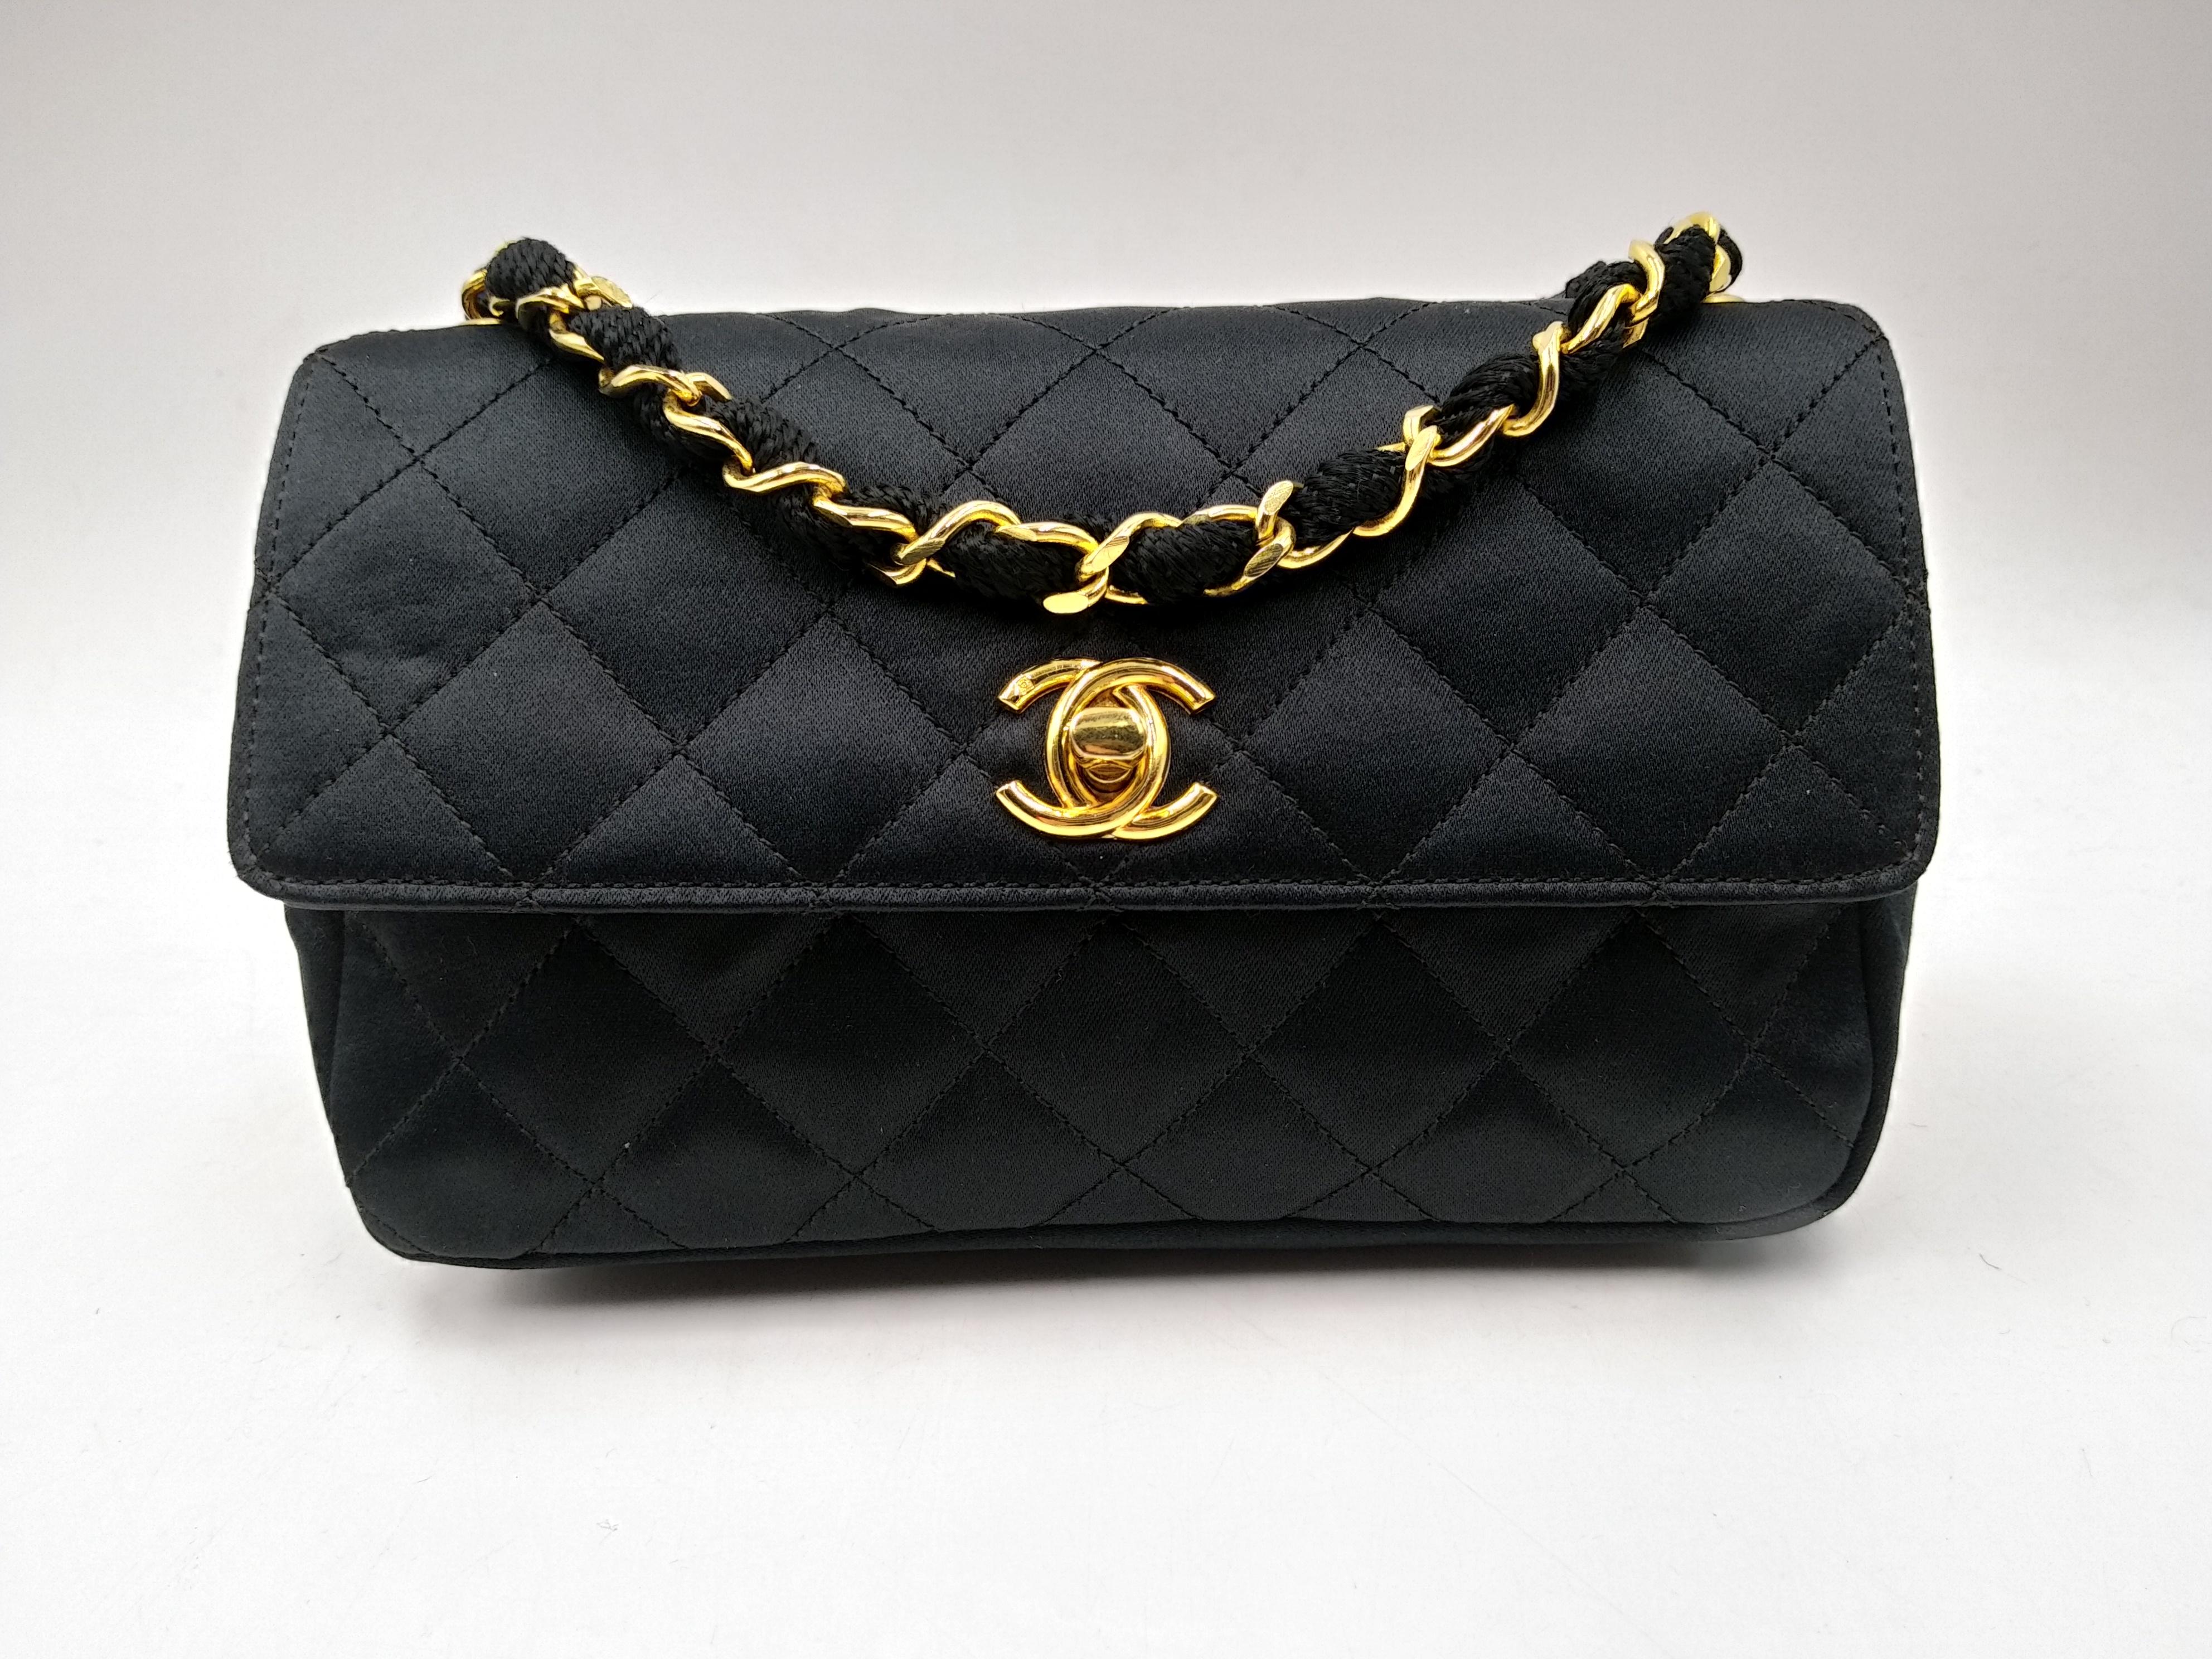 Chanel Black Quilted Satin Mini Flap Bag with Gold Hardware,  ( 1986/1988)
- 100% authentic Chanel
- Black Quilted Satin
- Long chain and fabric entwined strap
- The interior is lined in a tonal textile material
- One flat pocket inside
- Flap top